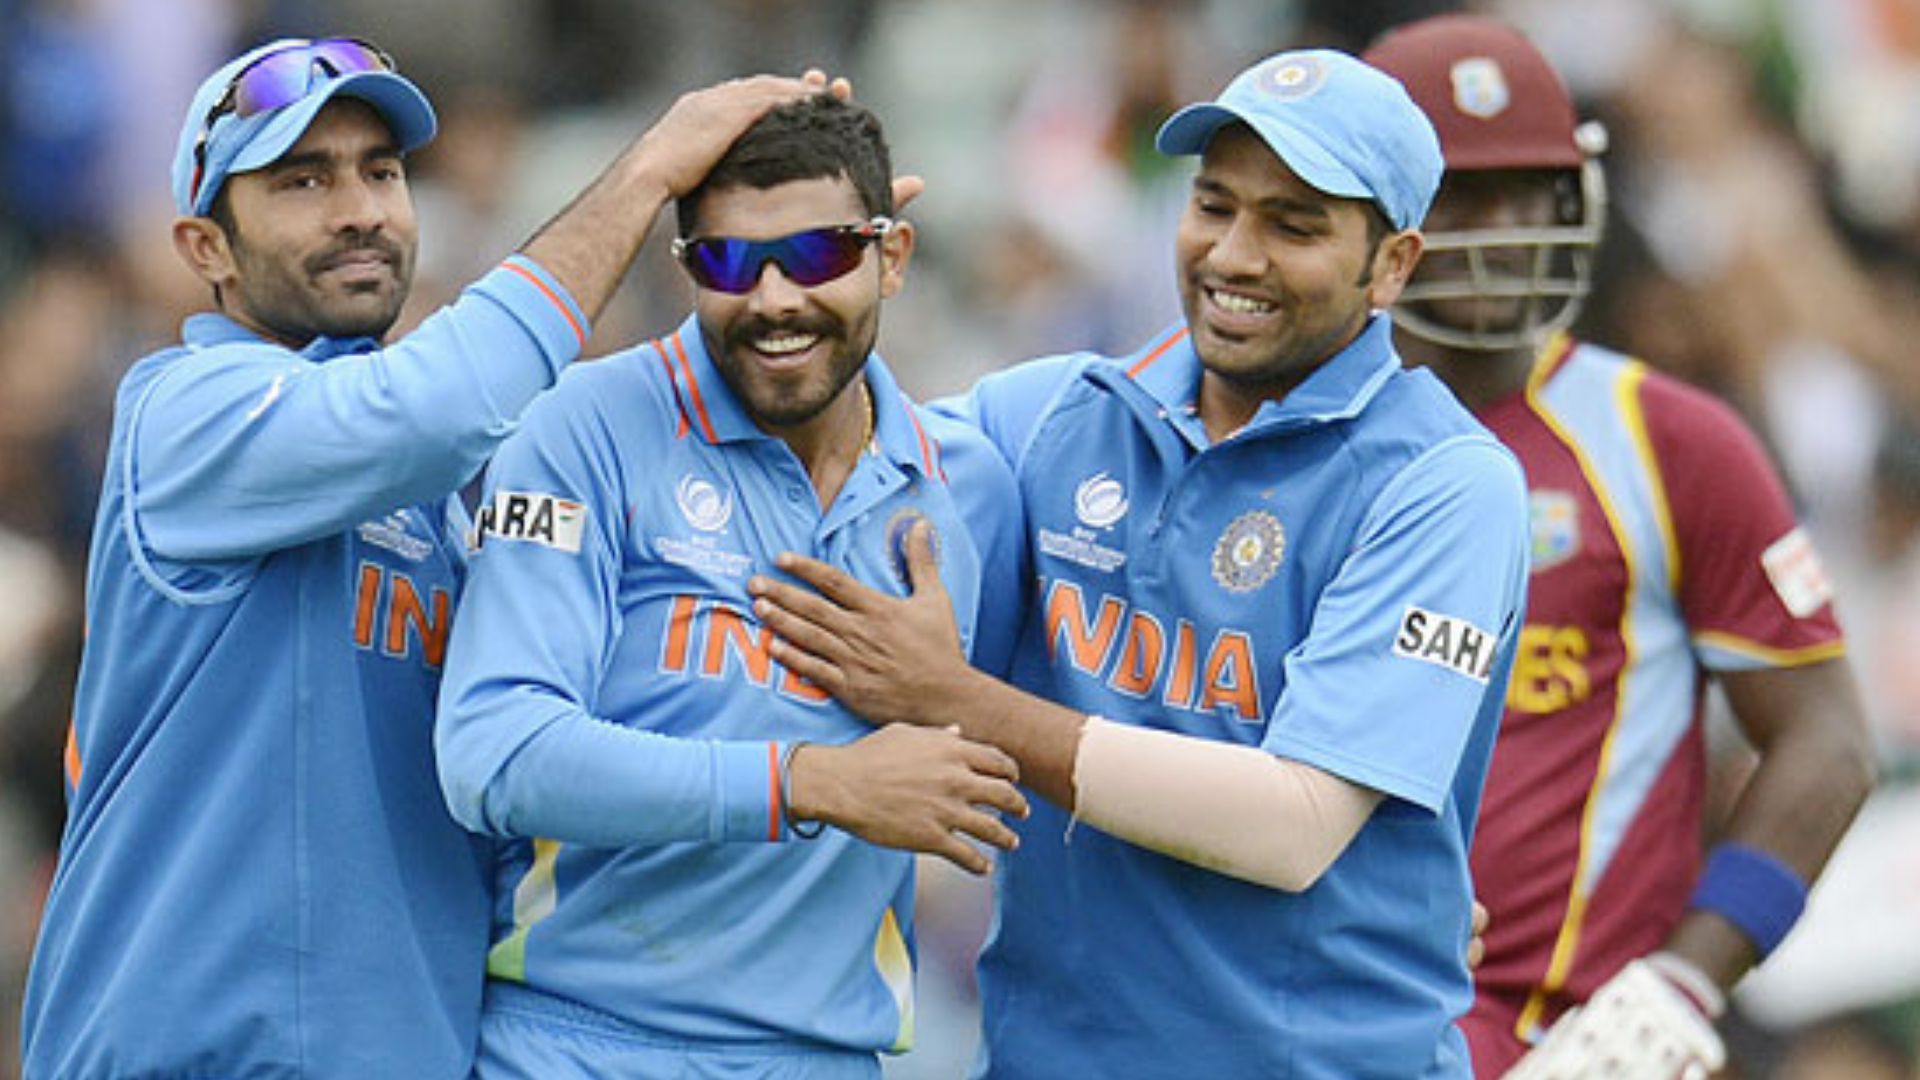 Jadeja celebrates with his teammates after picking up a wicket against West Indies in CT 2013.